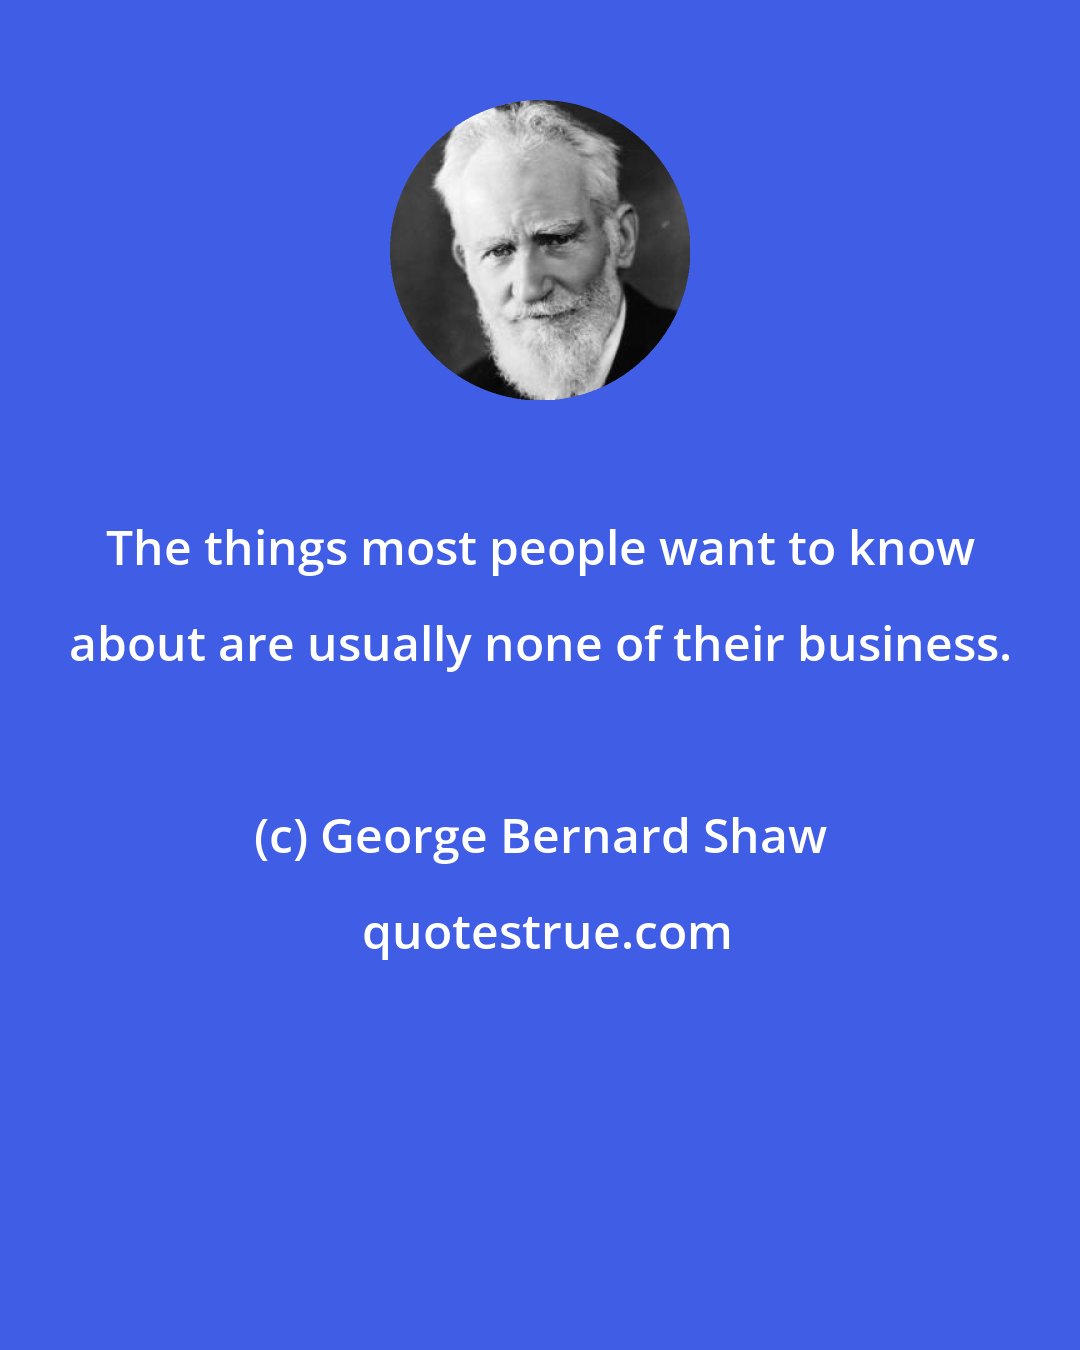 George Bernard Shaw: The things most people want to know about are usually none of their business.